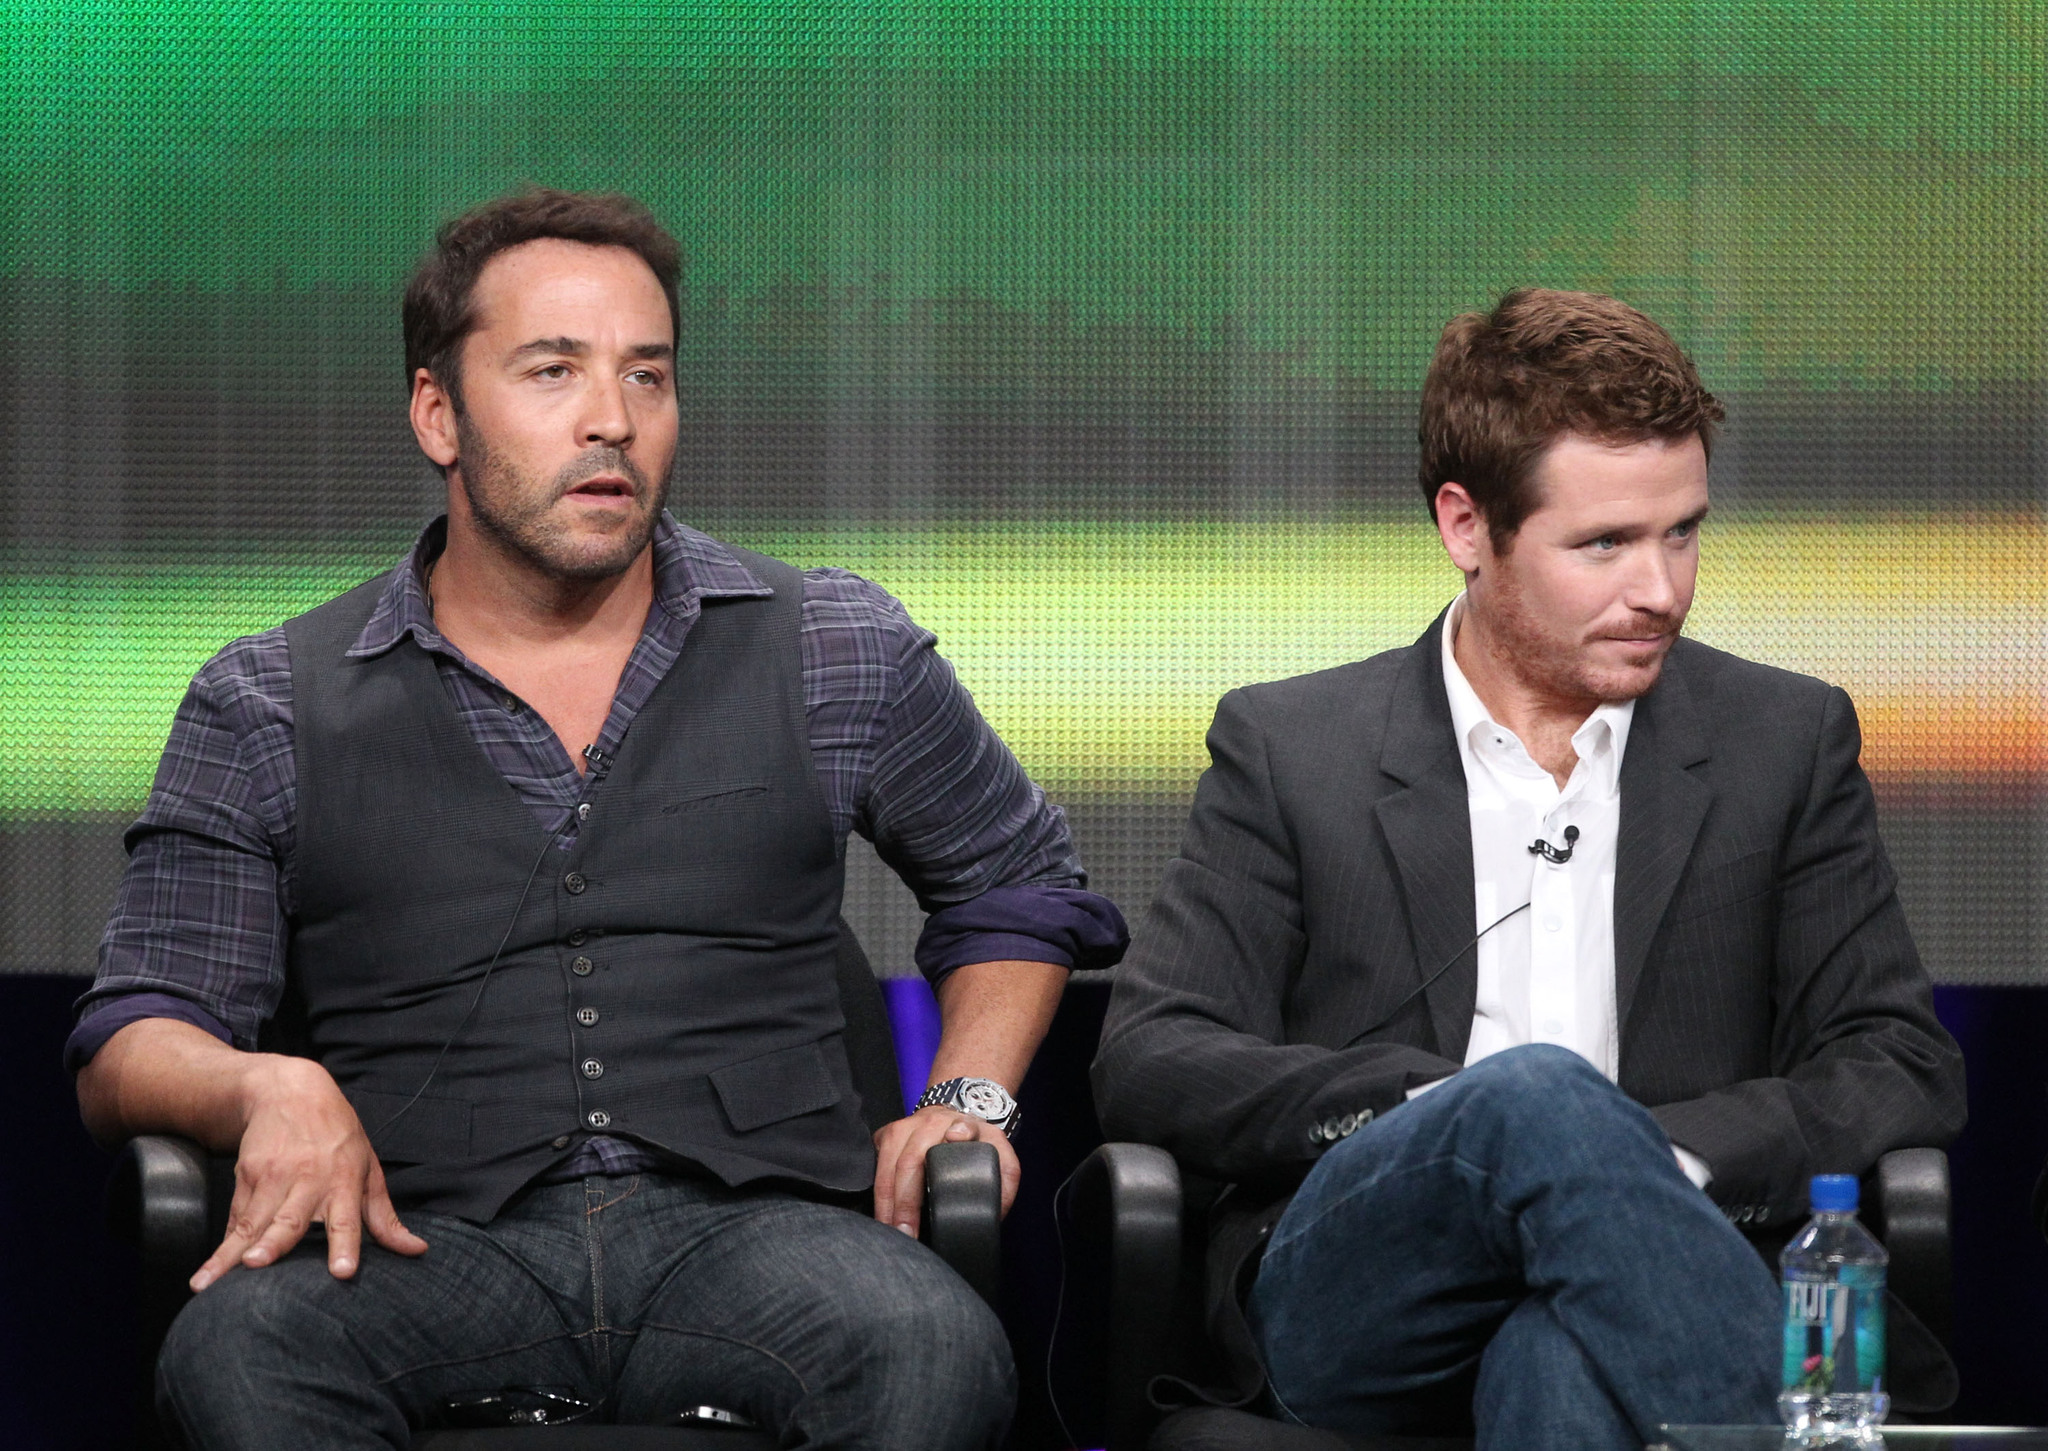 Jeremy Piven and Kevin Connolly